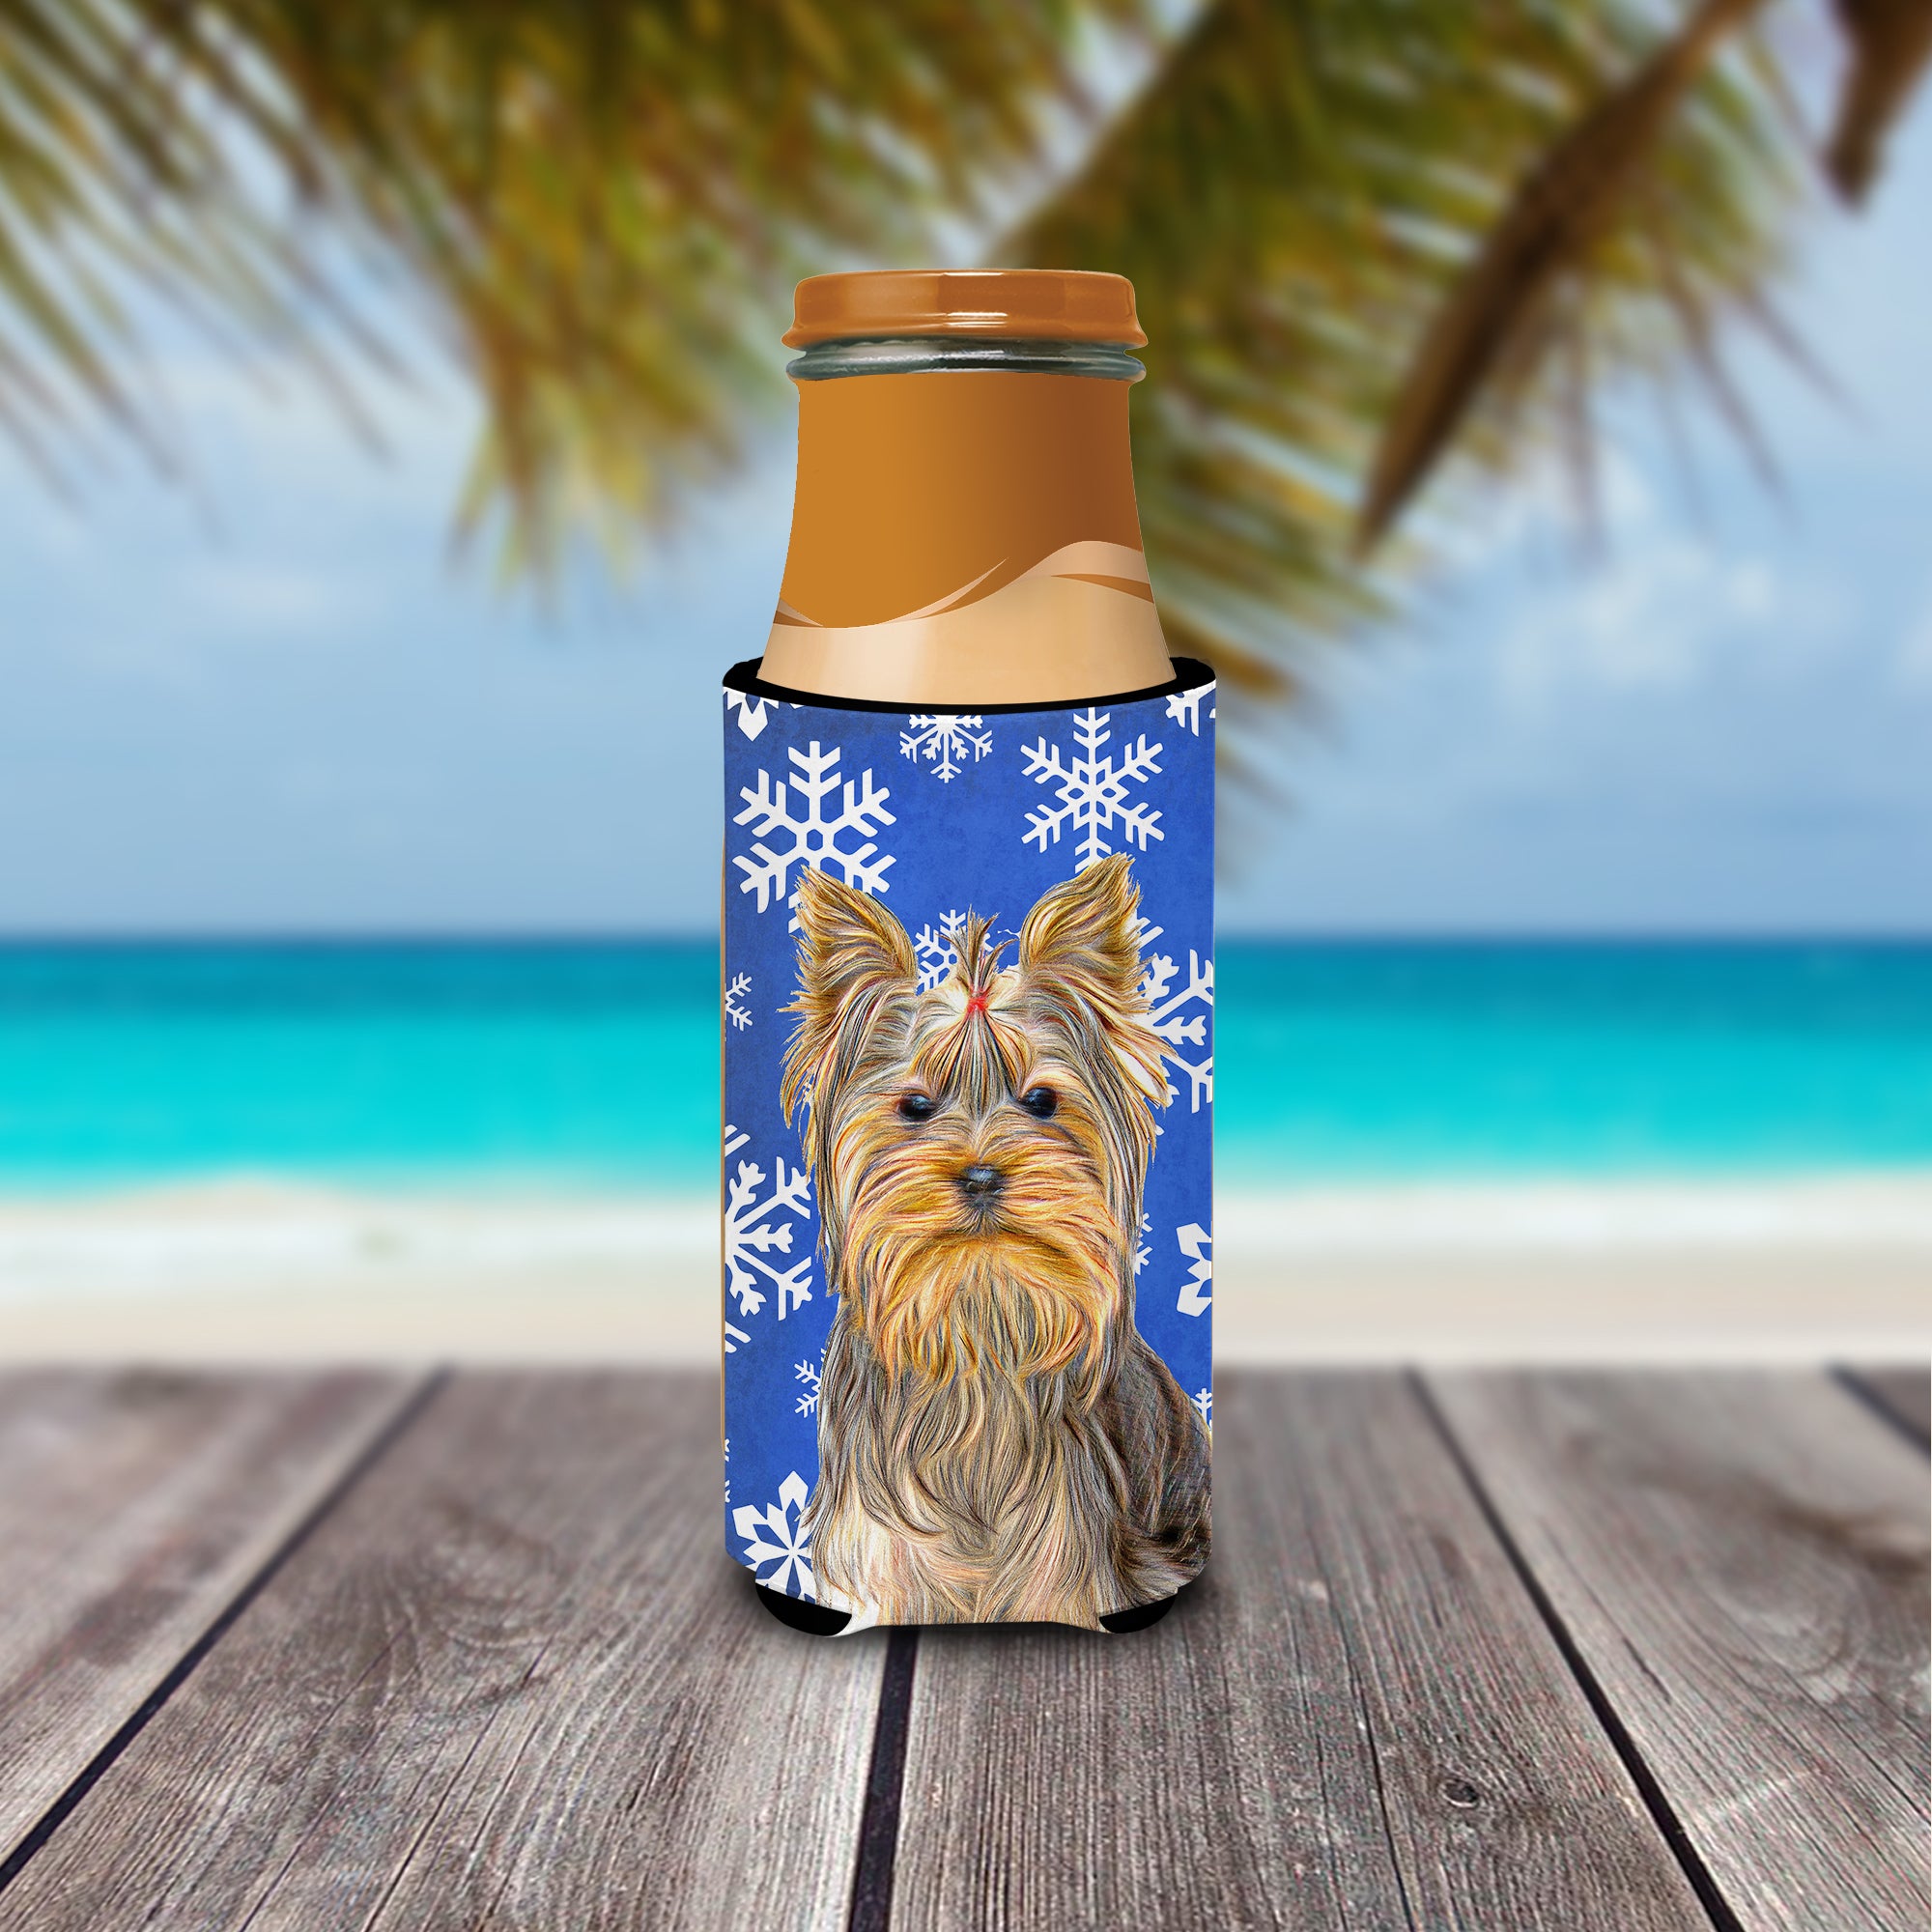 Winter Snowflakes Holiday Yorkie / Yorkshire Terrier Ultra Beverage Insulators for slim cans KJ1177MUK.